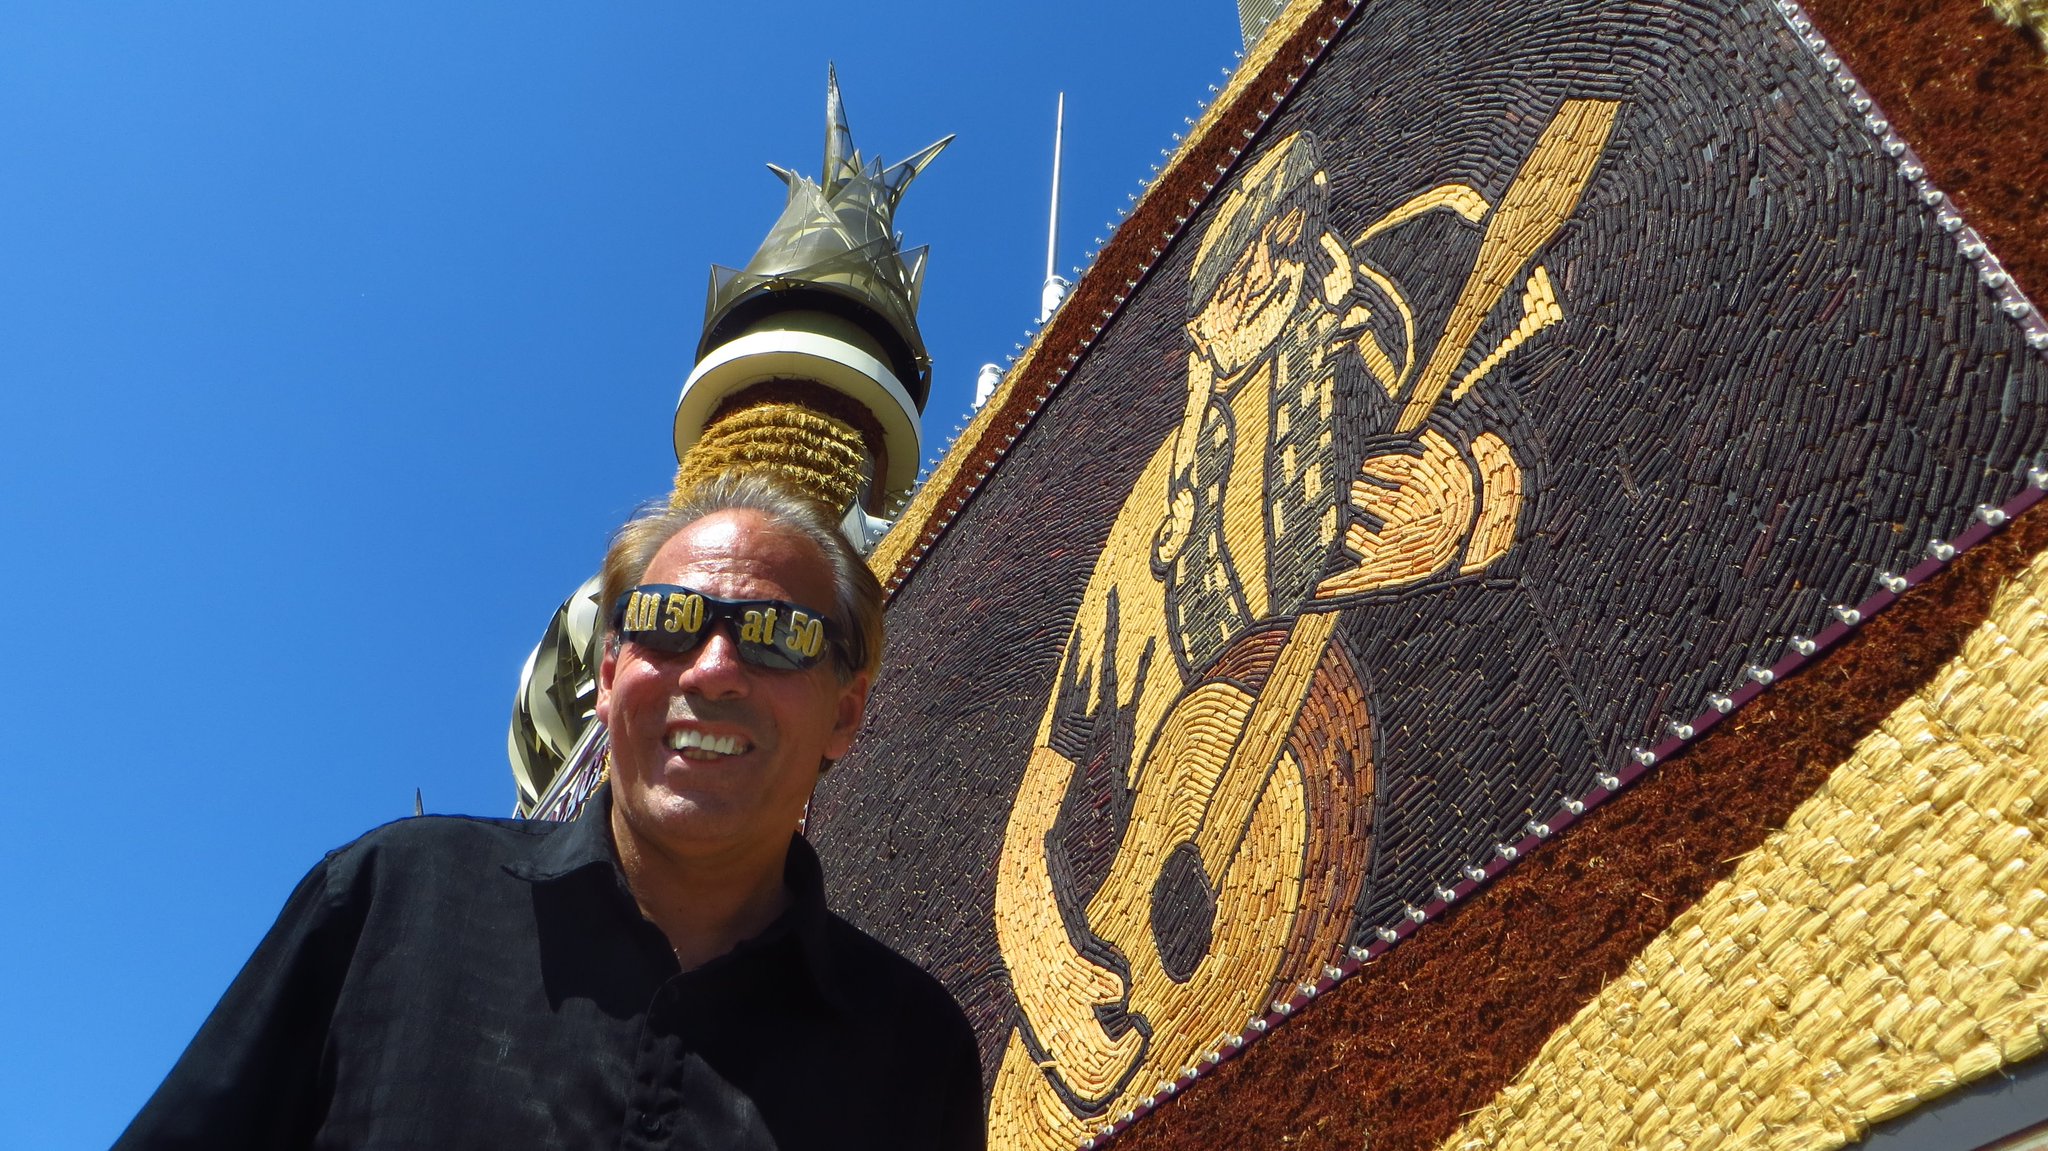 4/29 Happy 84th birthday to Willie Nelson.  Here he is made of corn at the Corn Palace in Mitchell, South Dakota 